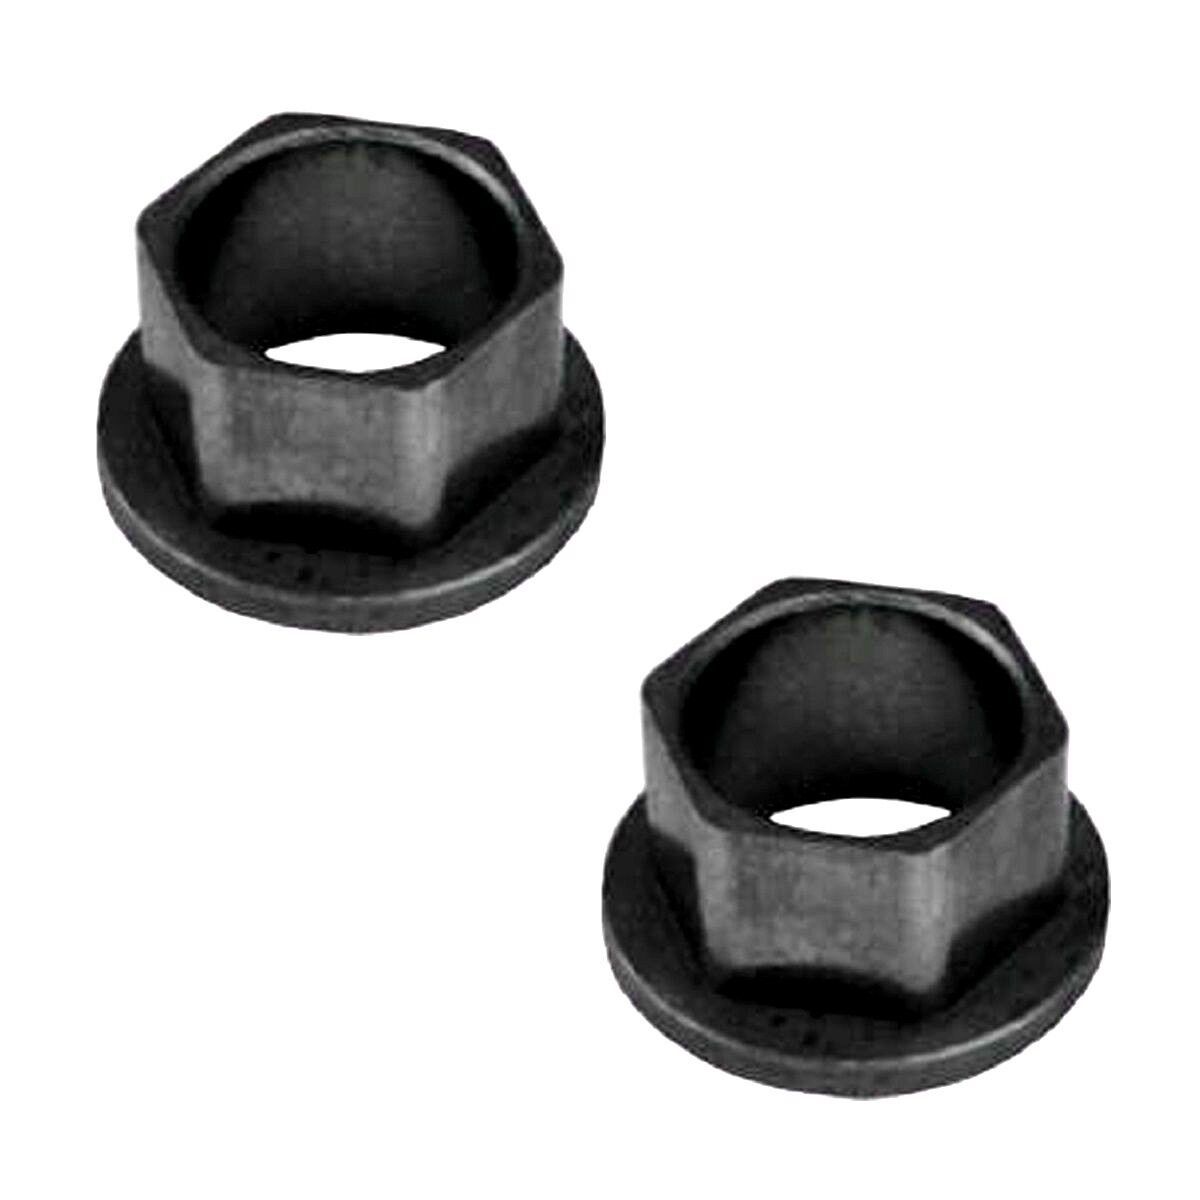 Primary image for 2 Pk Hex Bushings Fits 55213 55216 05521600 53836 Snowblowers ST-524 & ST-724